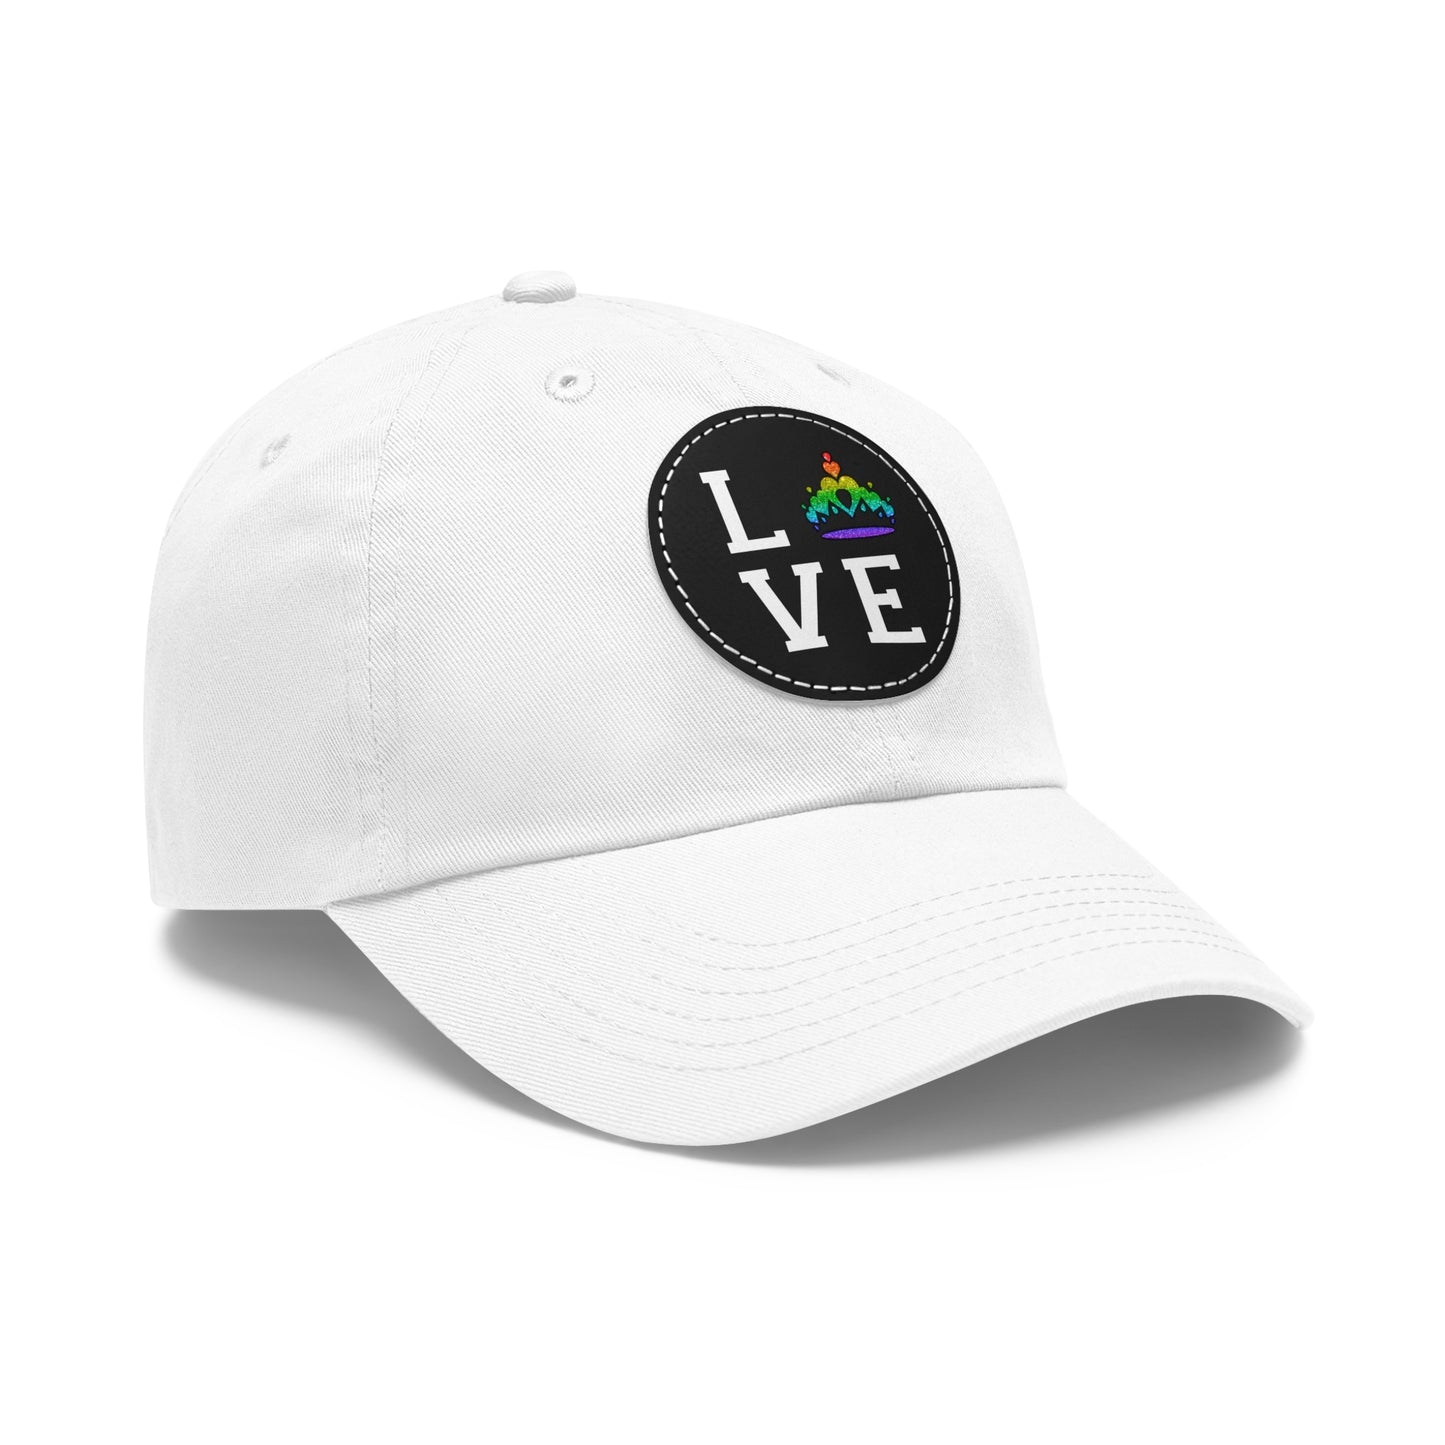 Queens for Love - Dad Hat with Leather Patch